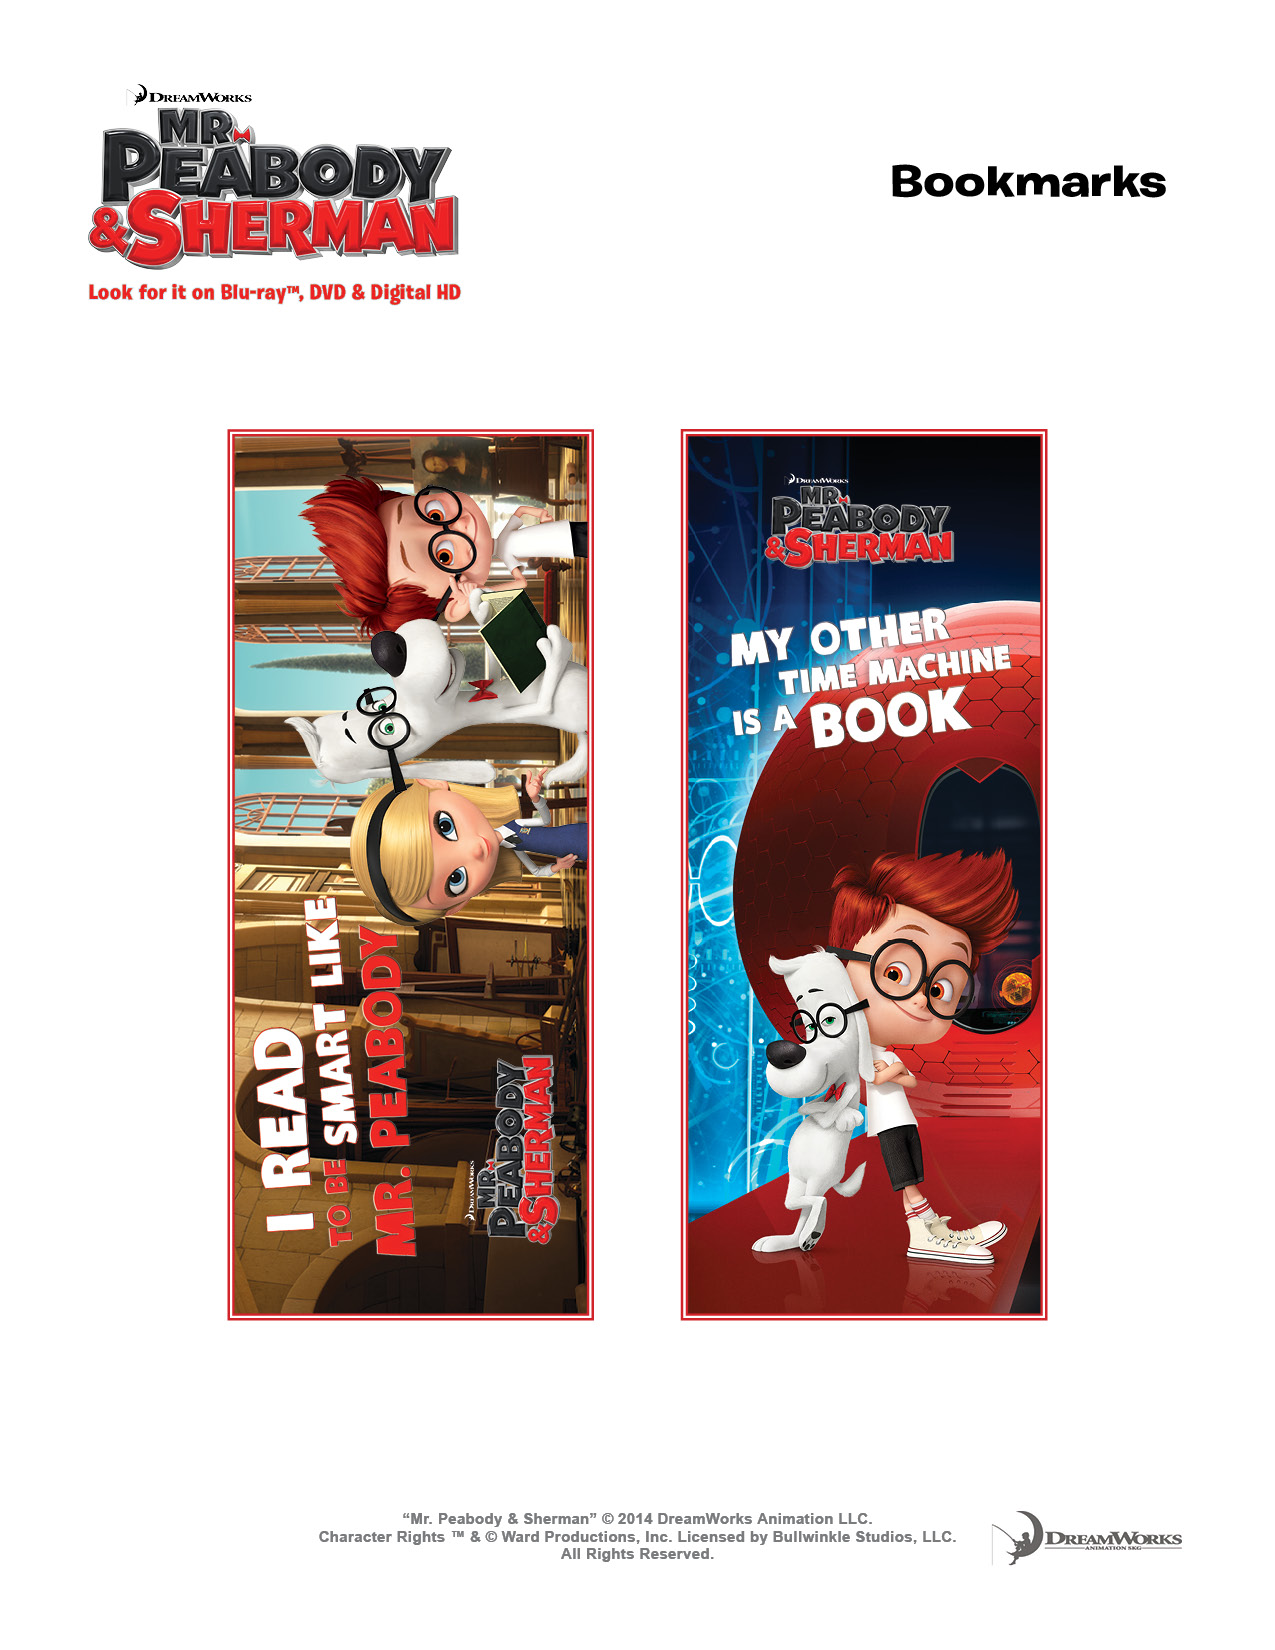 Mr. Peabody and Sherman Book Marks